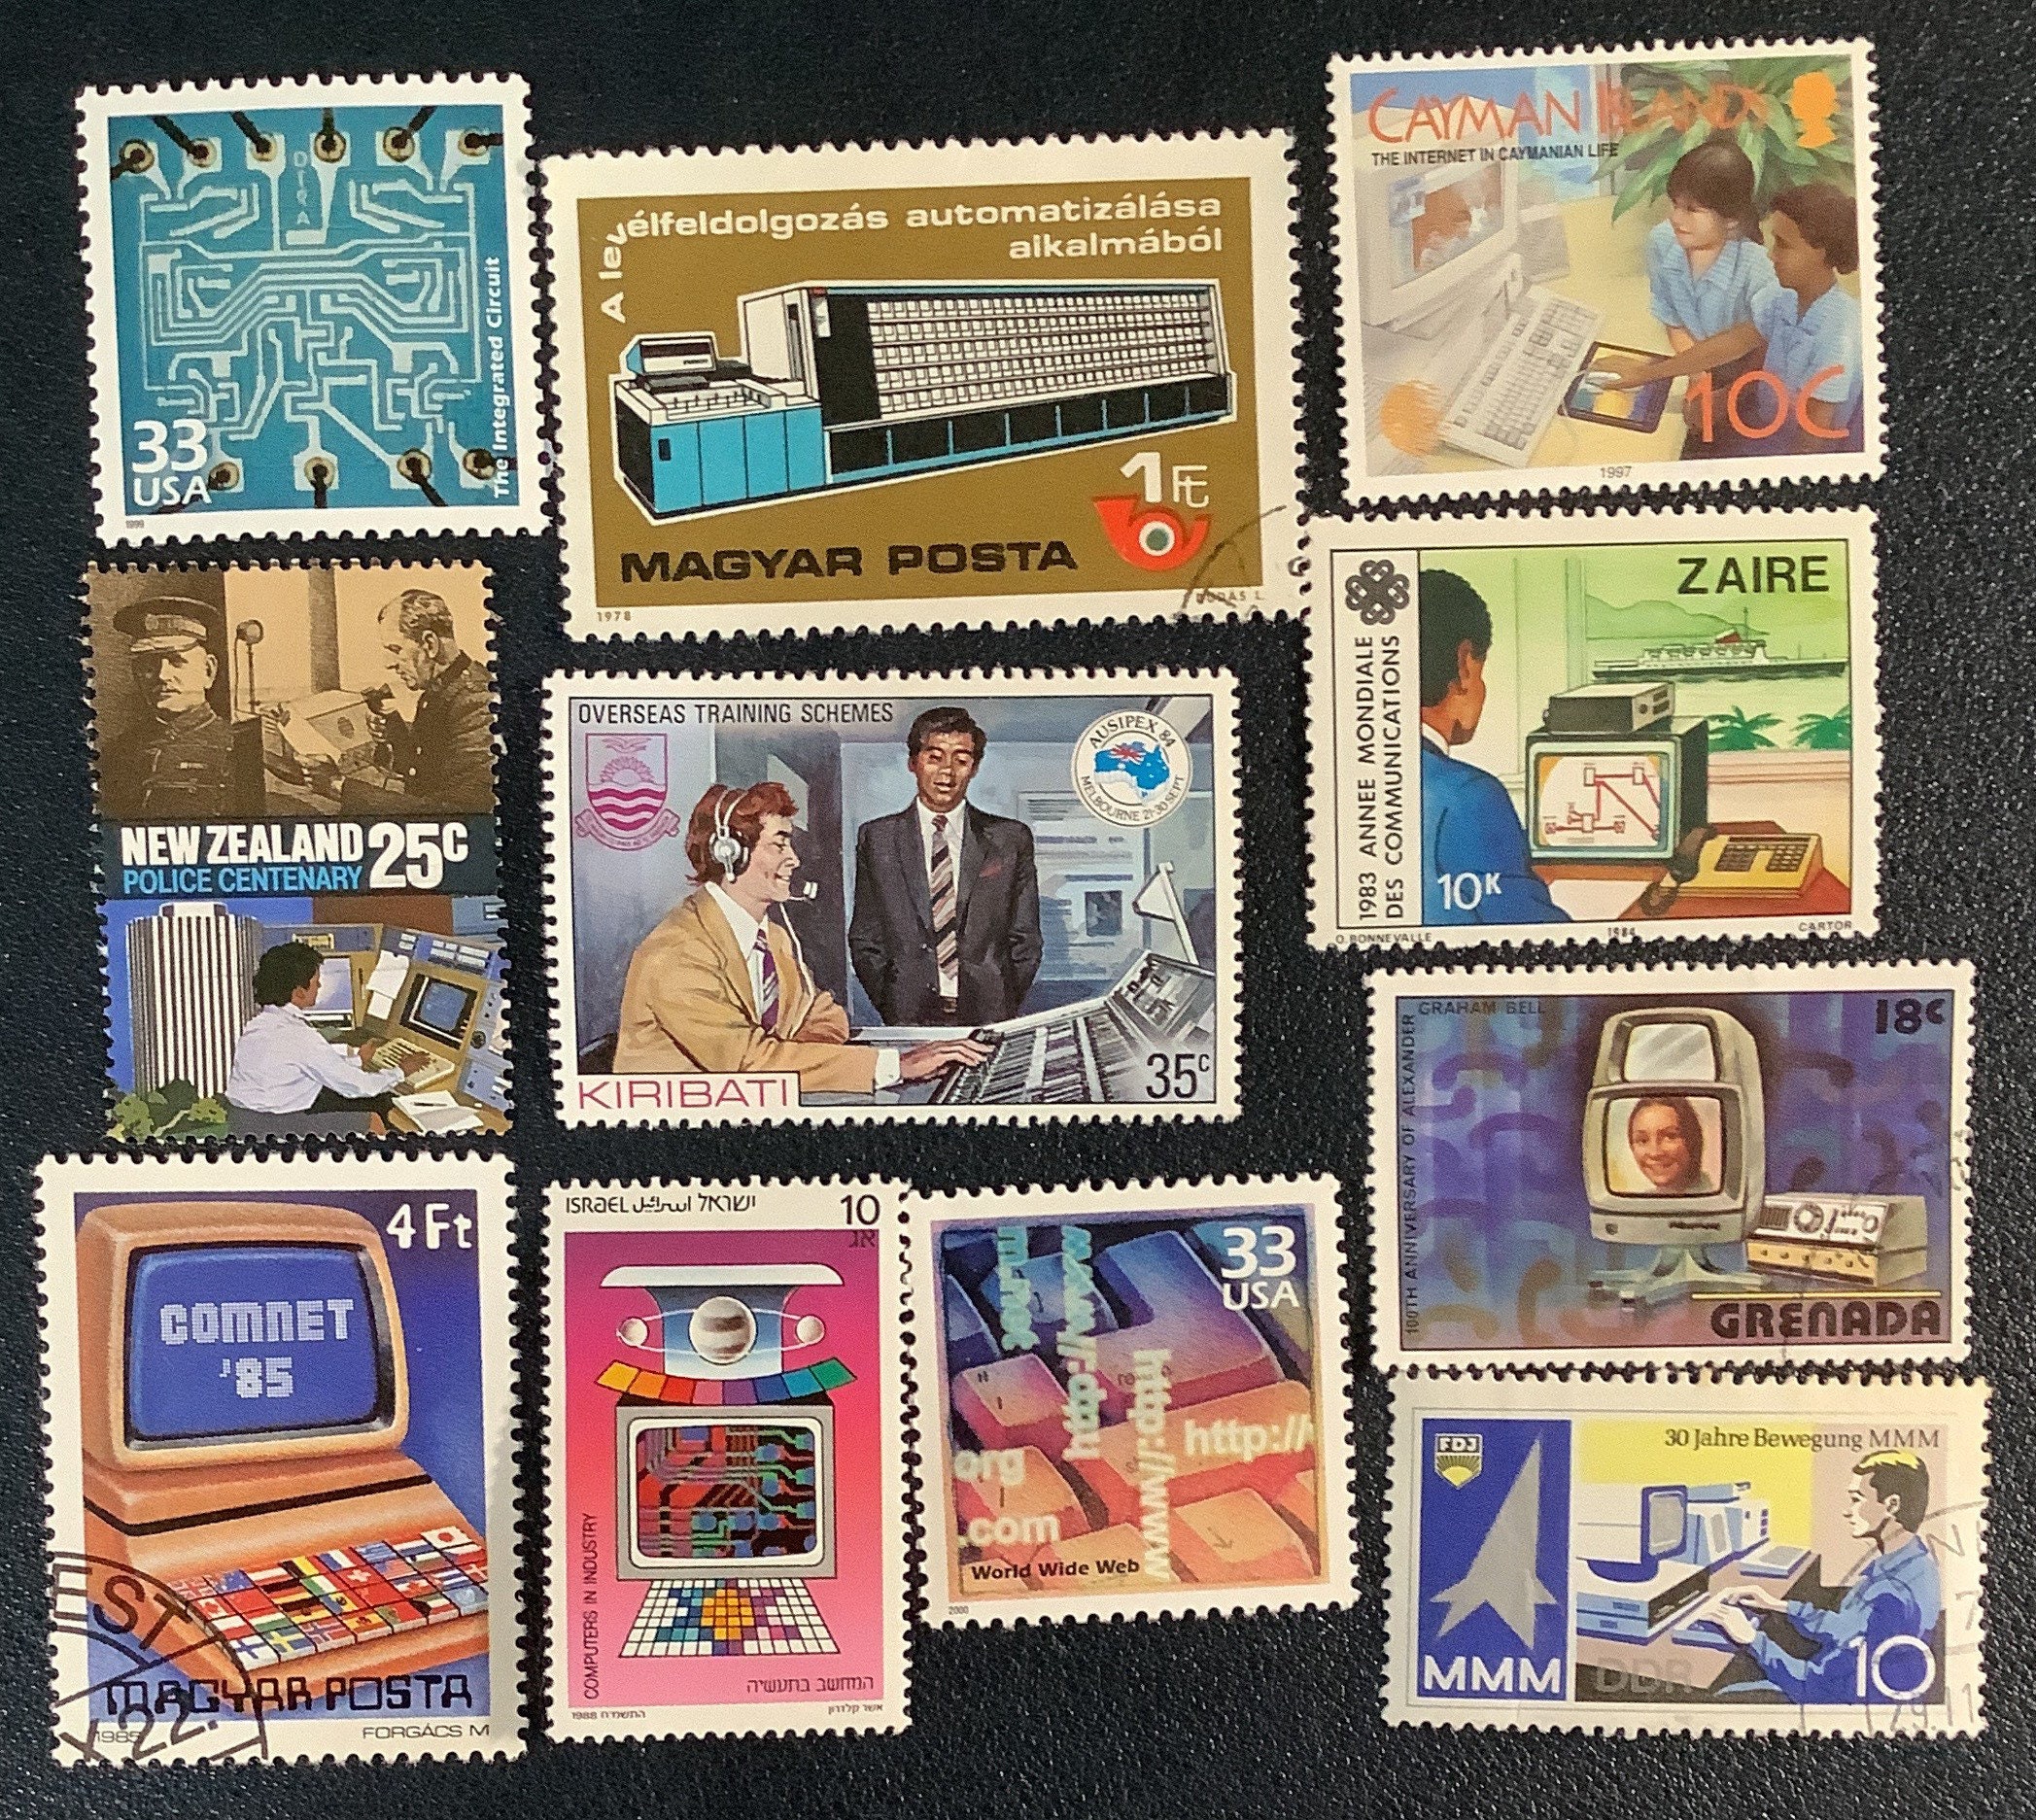 50 SHADES of GRAYS Used World Postage Stamps for Crafting, Collage